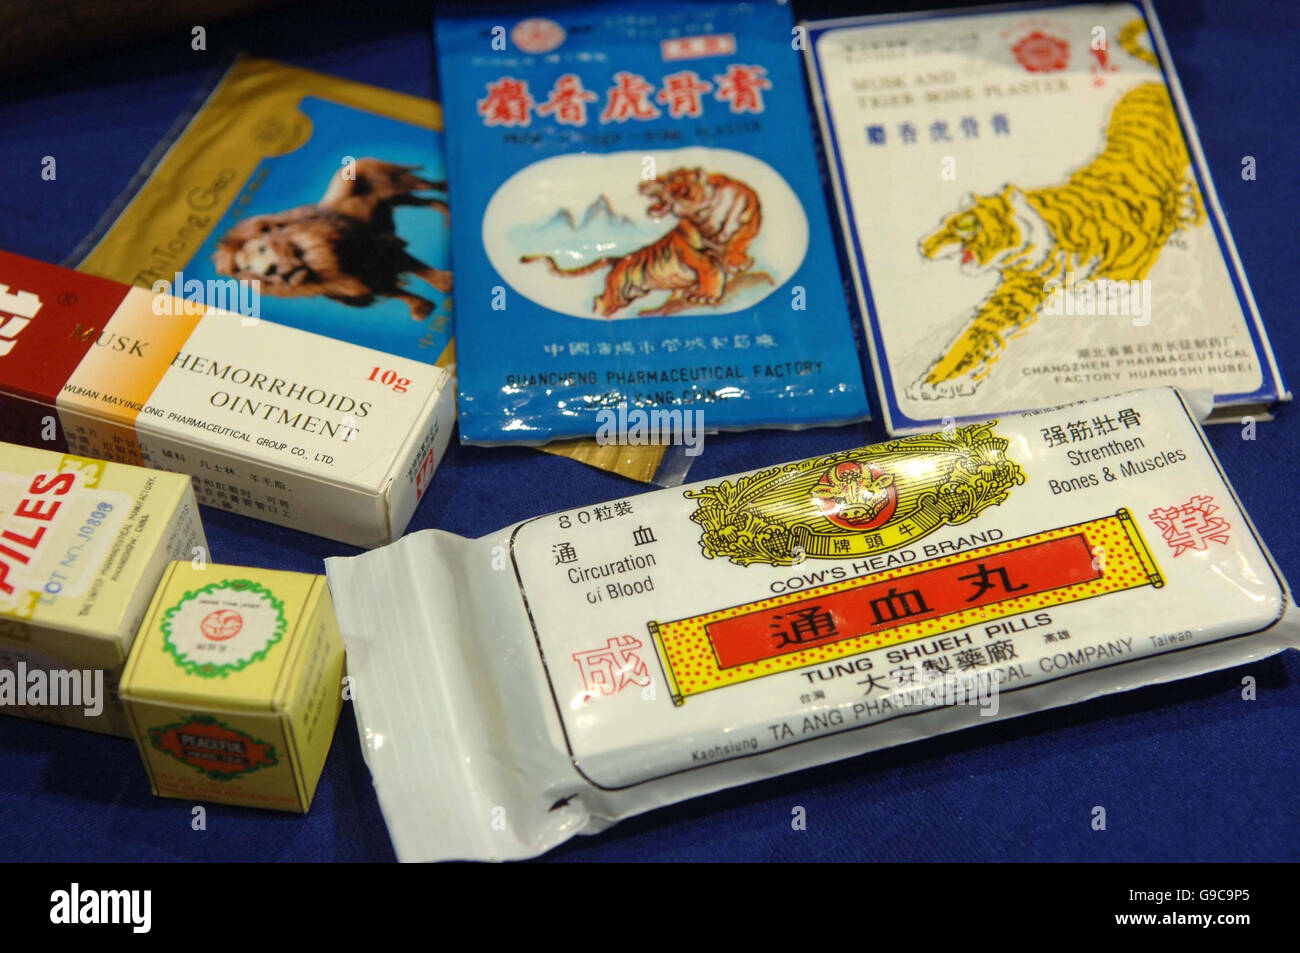 A range of Chinese medicines which can contain poisons and parts of endangered species on show at the Trading Standards Institute conference in London . Stock Photo